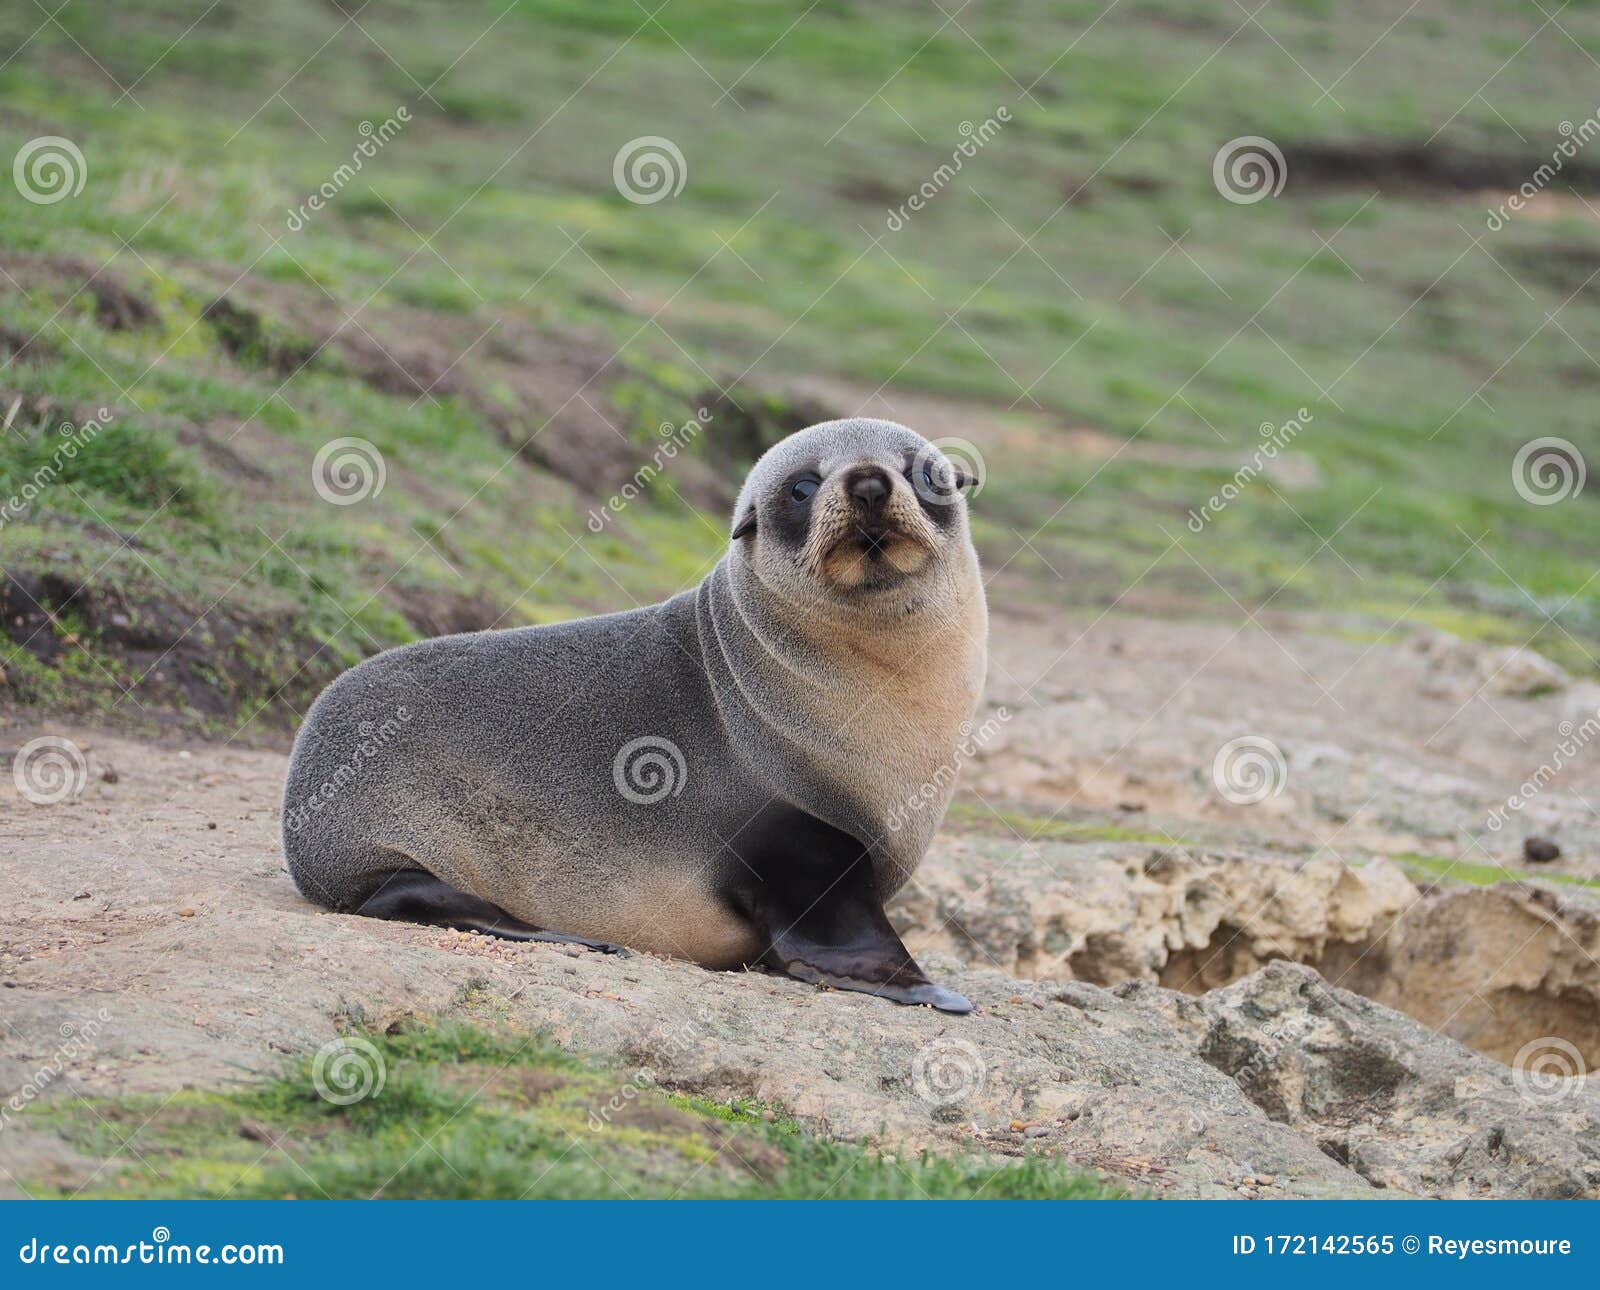 the cutest sea lion baby.